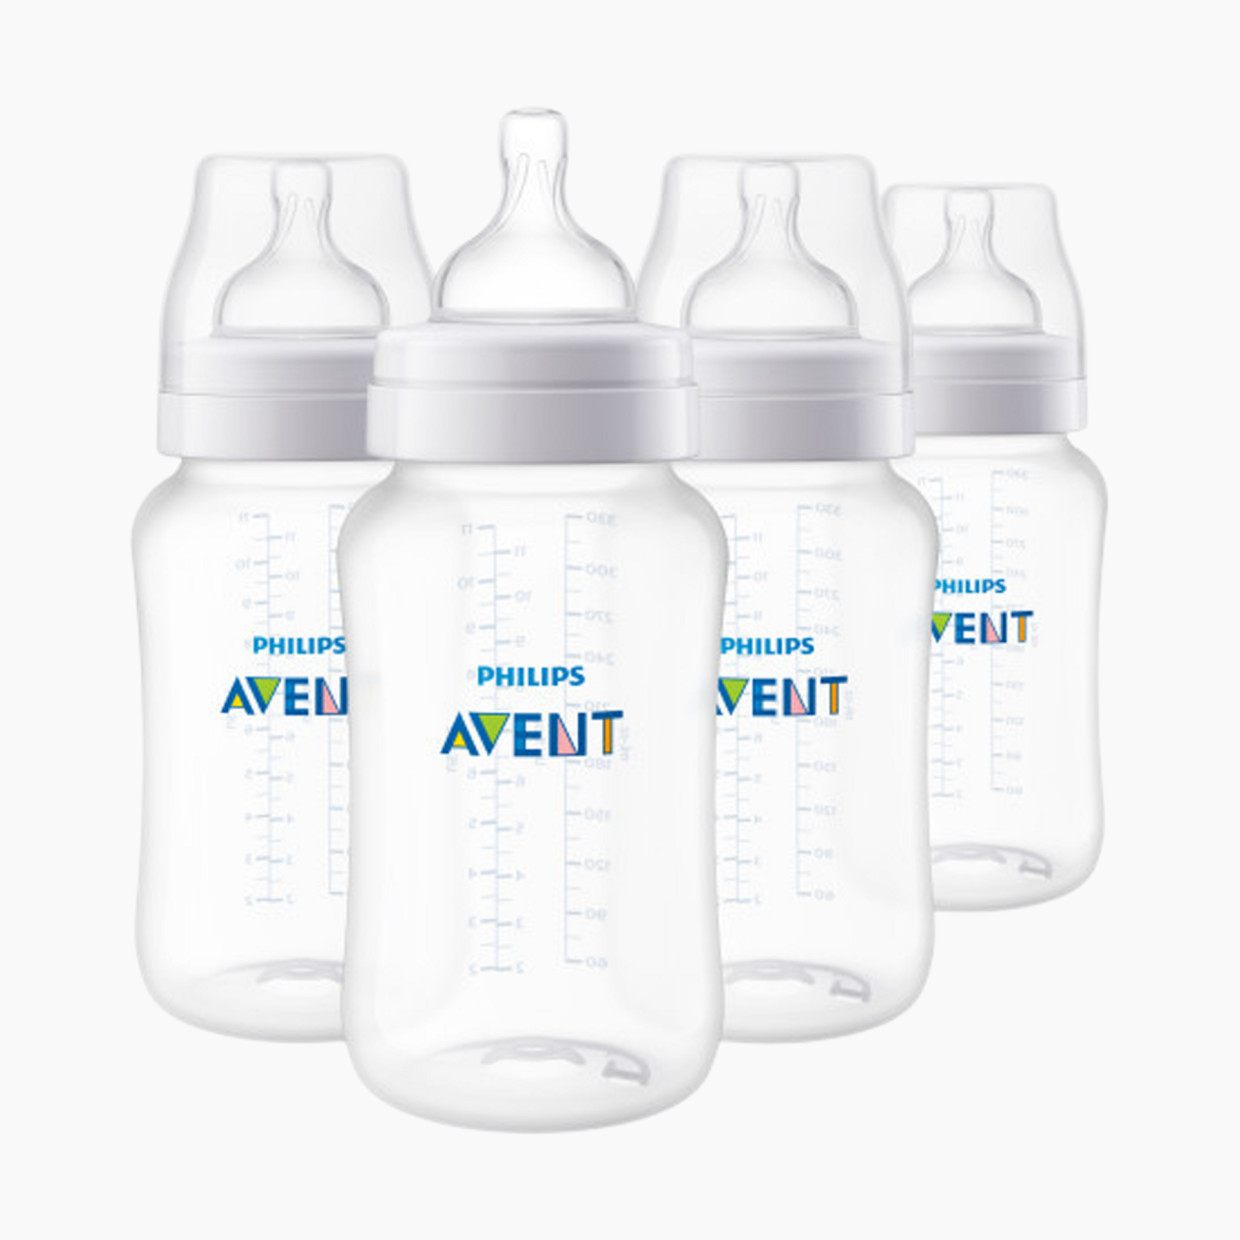 Philips Avent Avent Anti-colic Baby Bottle - Clear, 11 Oz, 4.